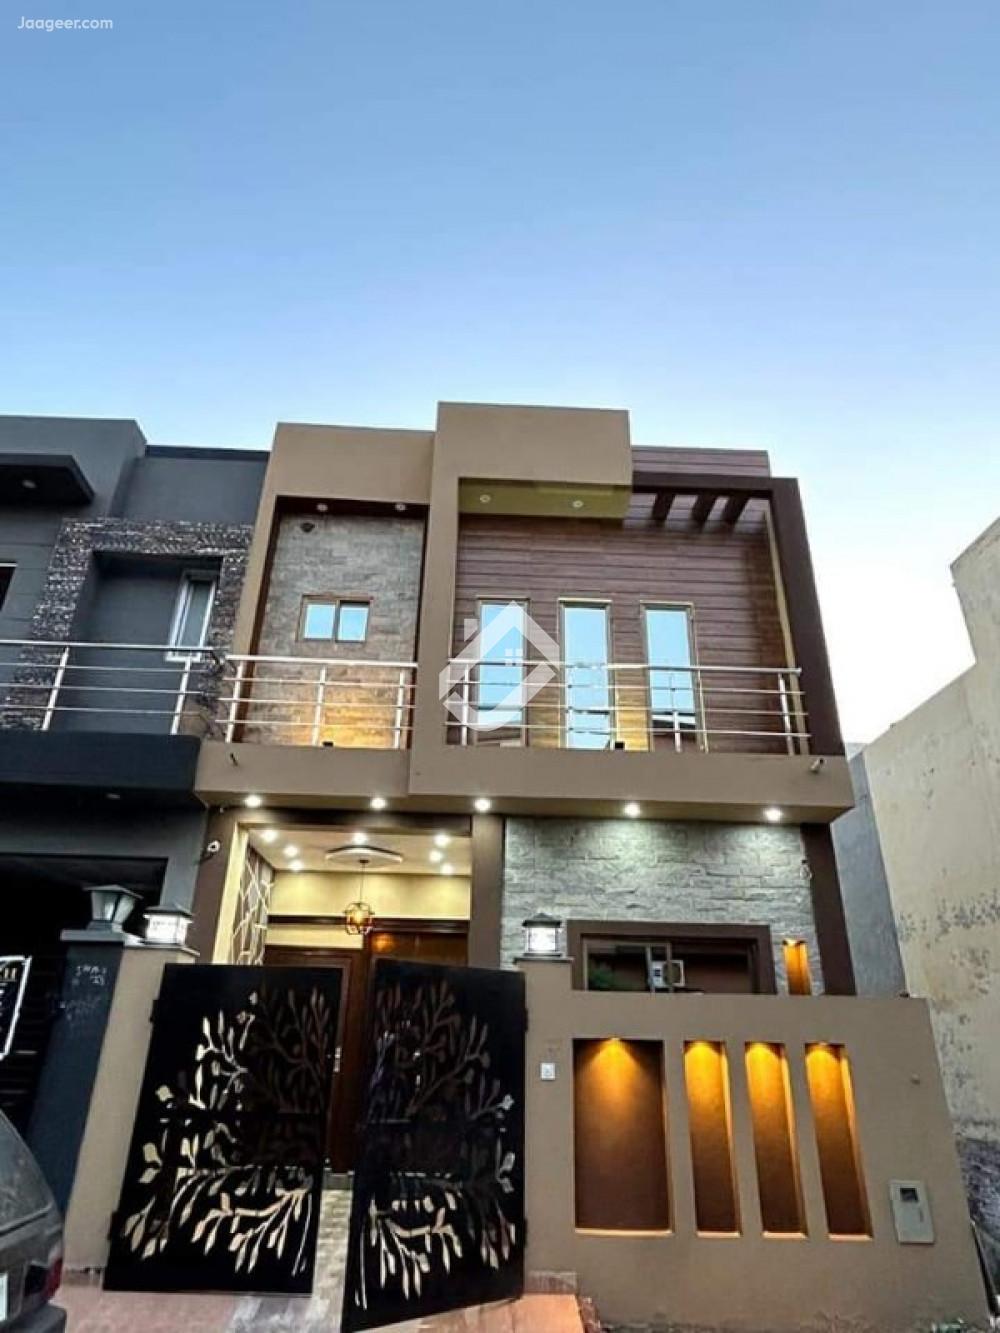 Main image 3 Marla Double Storey House For Sale In Lahore Medical Housing Society Main Canal Road Lahore Medical Housing Society, Lahore